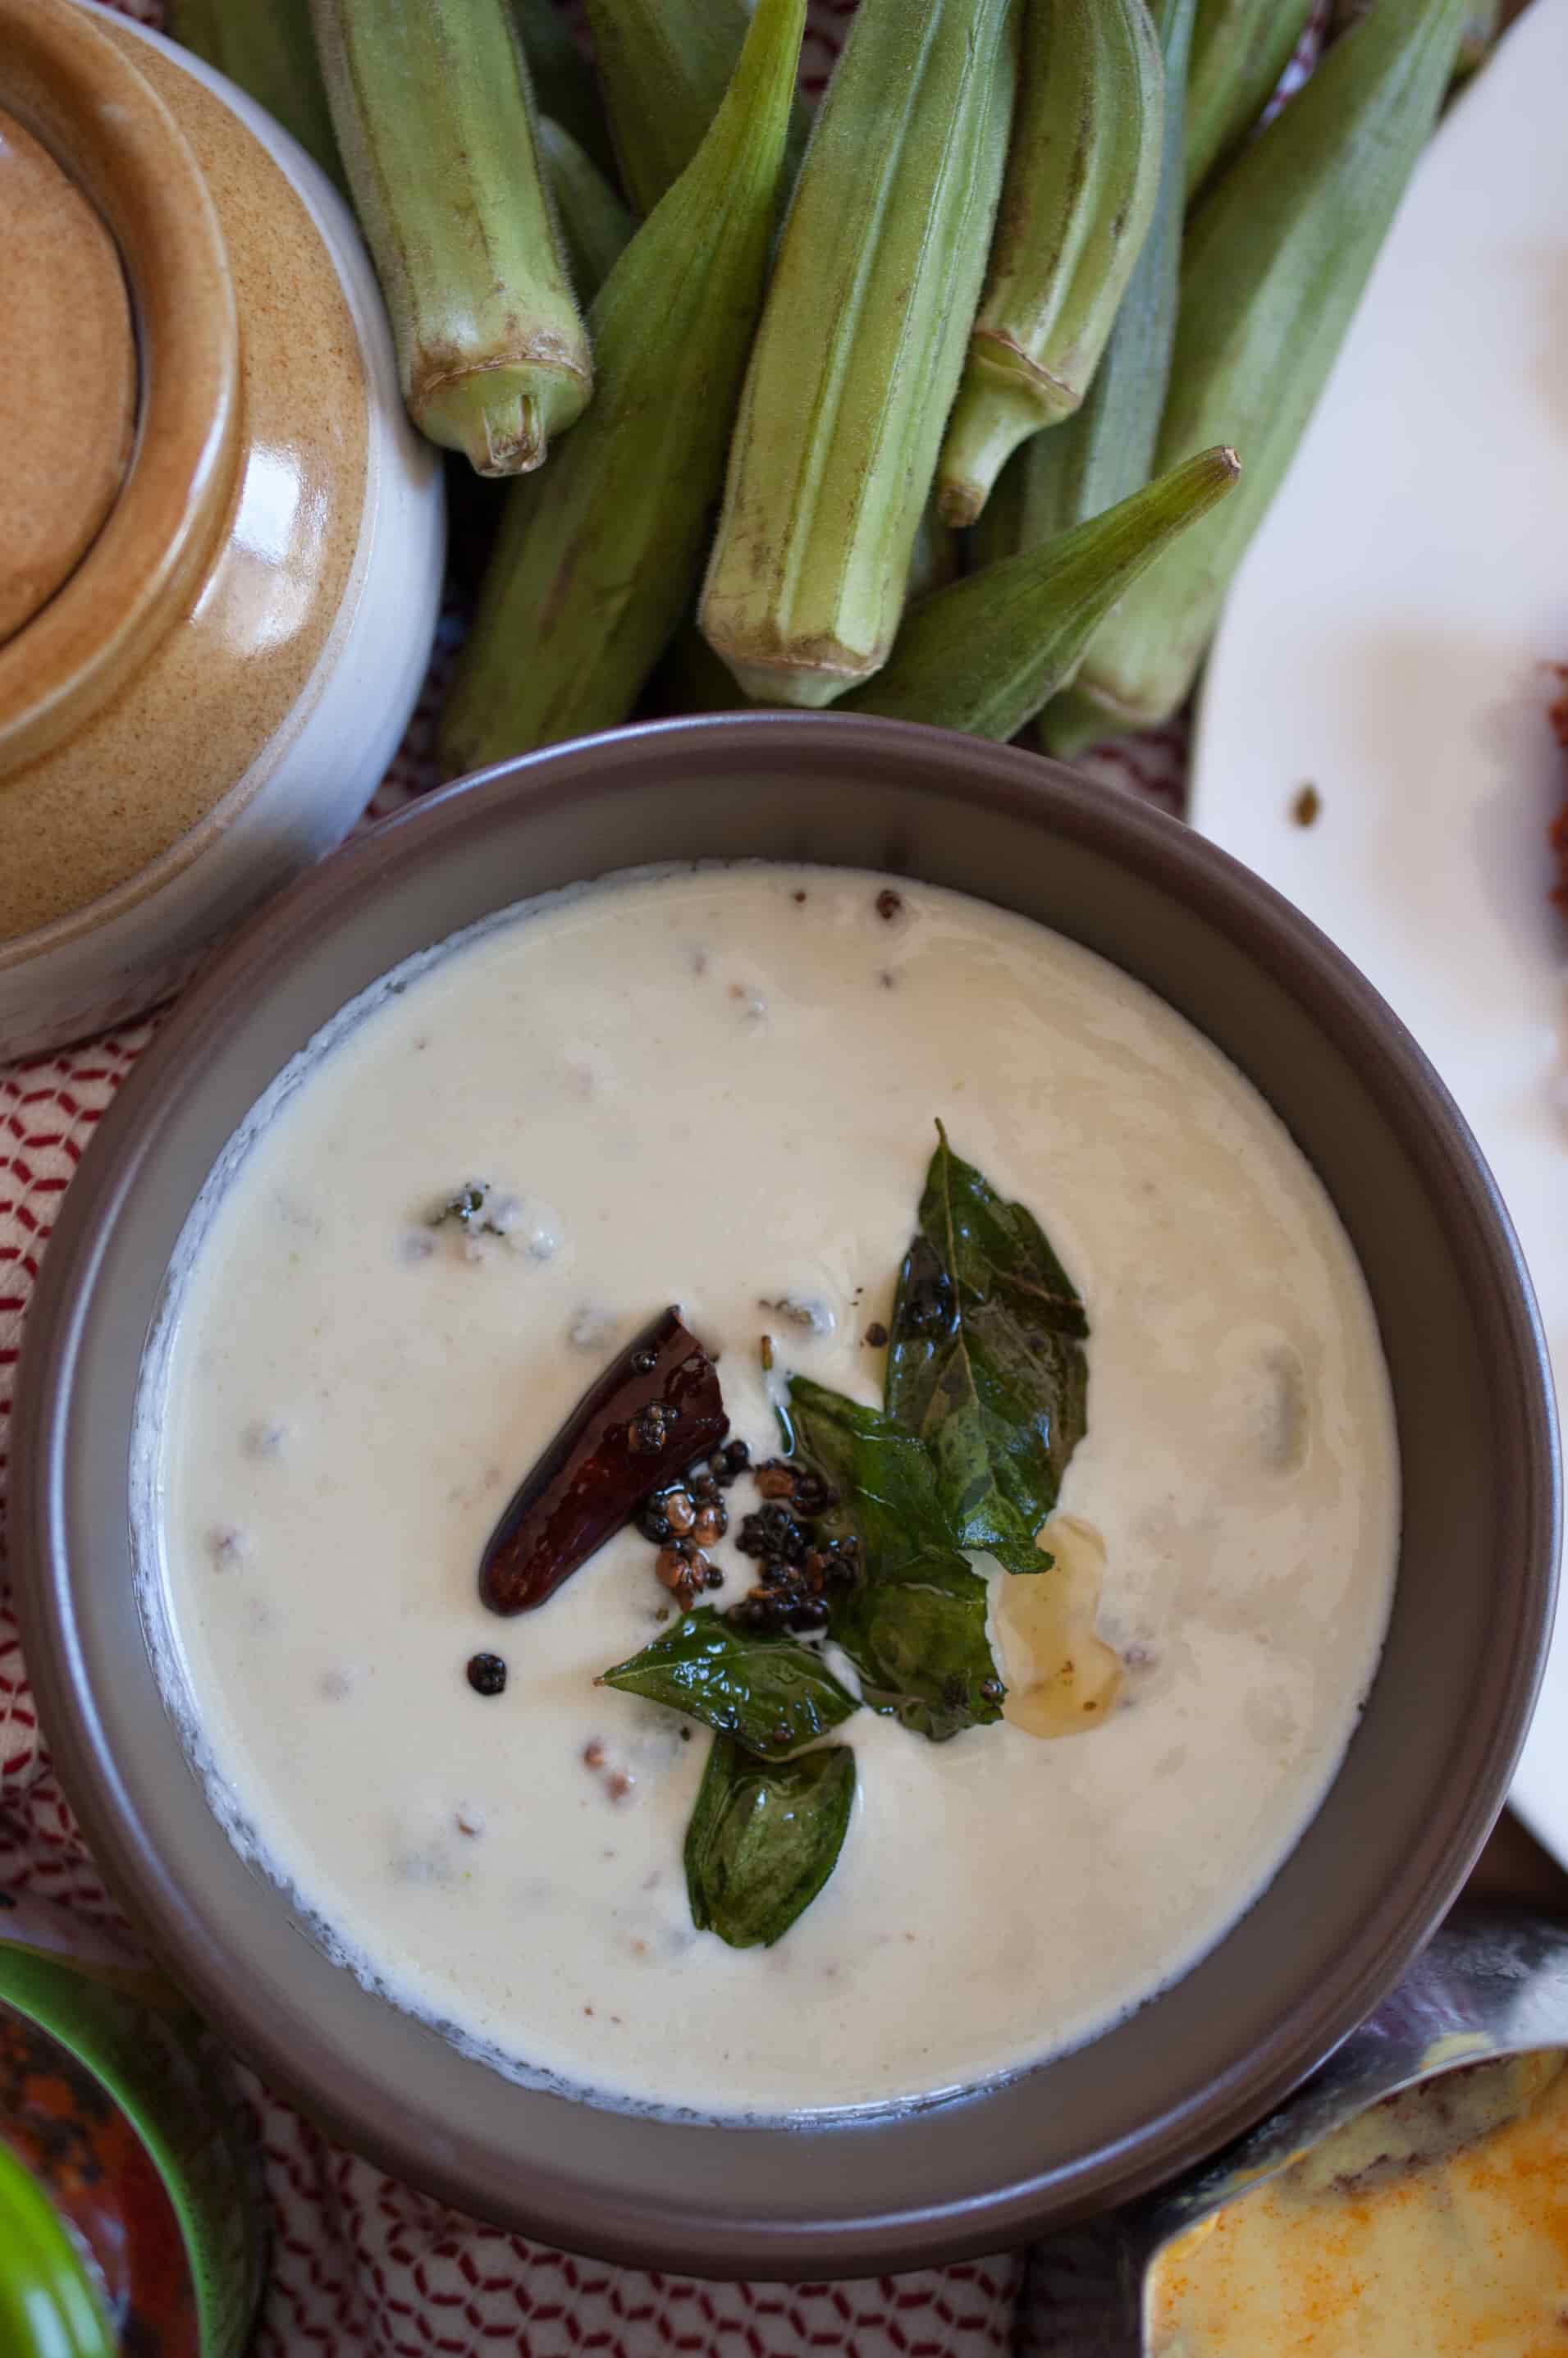 Lady’s finger/Okra/Bhindi fried and cooked in spicy coconut and yogurt based gravy. It’s an easy to prepare and a yummy side dish which goes well with rice